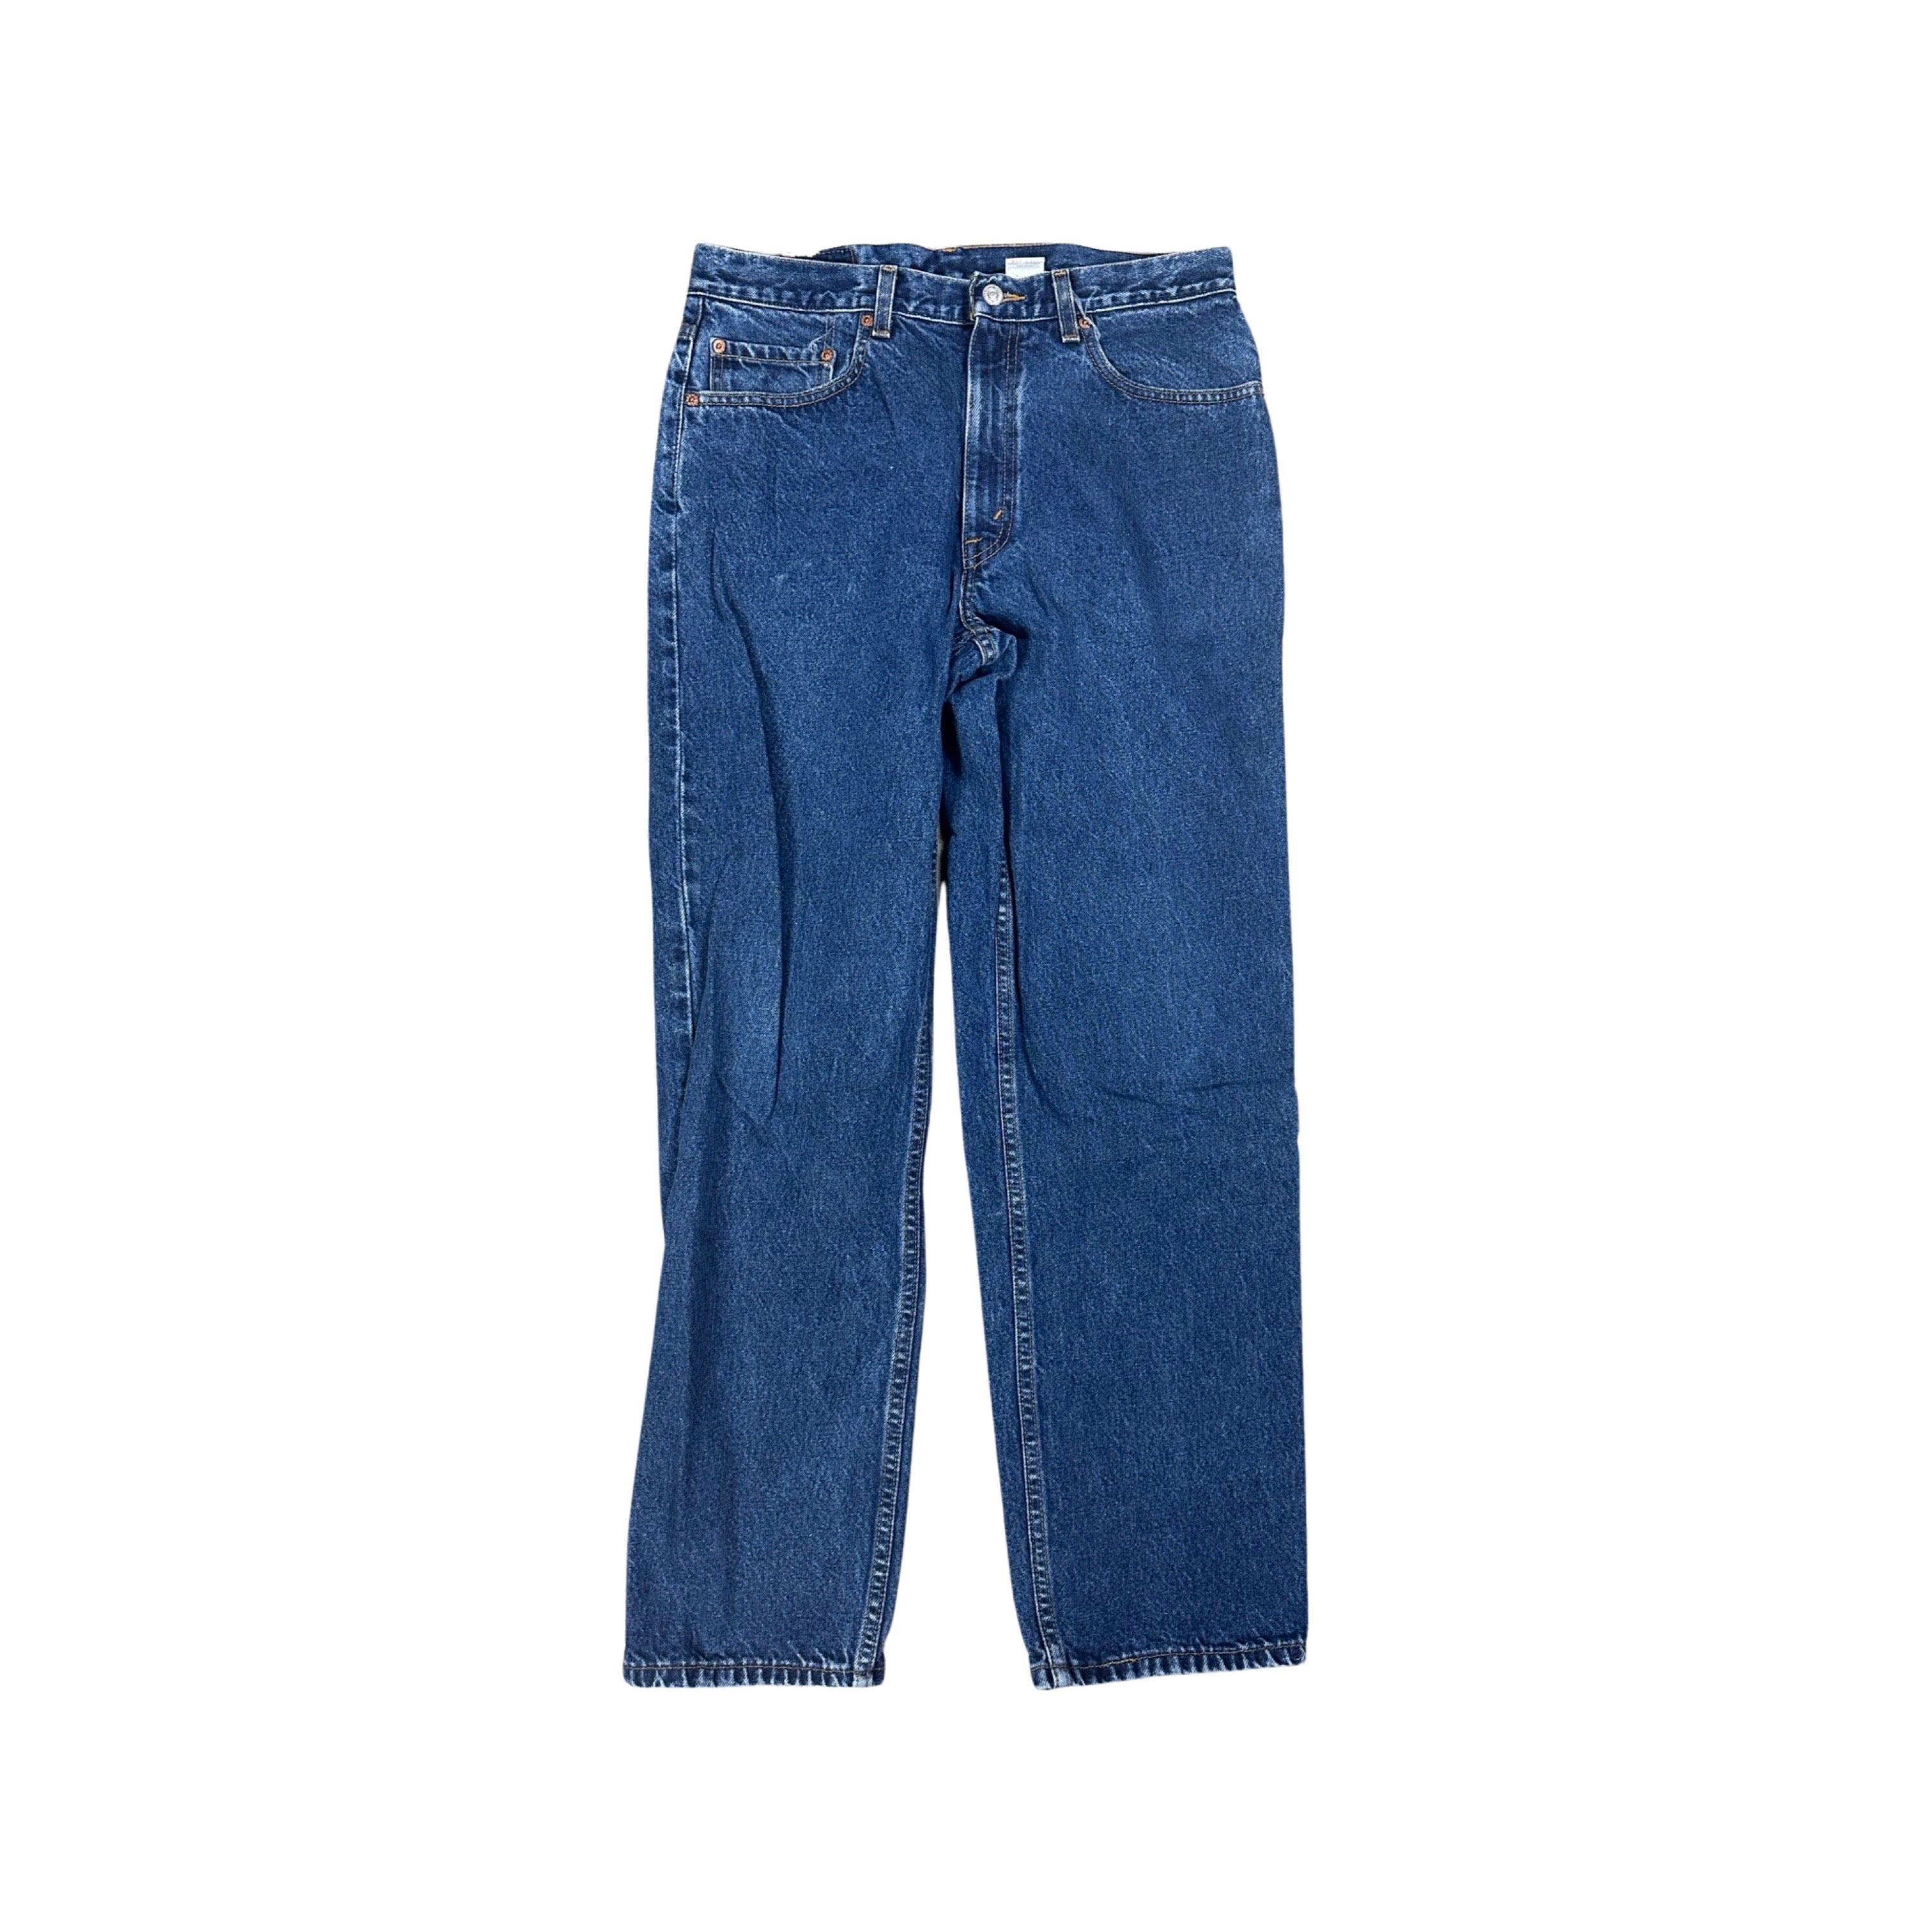 Levi’s 550 Relaxed Fit Jeans 2000 (33”)